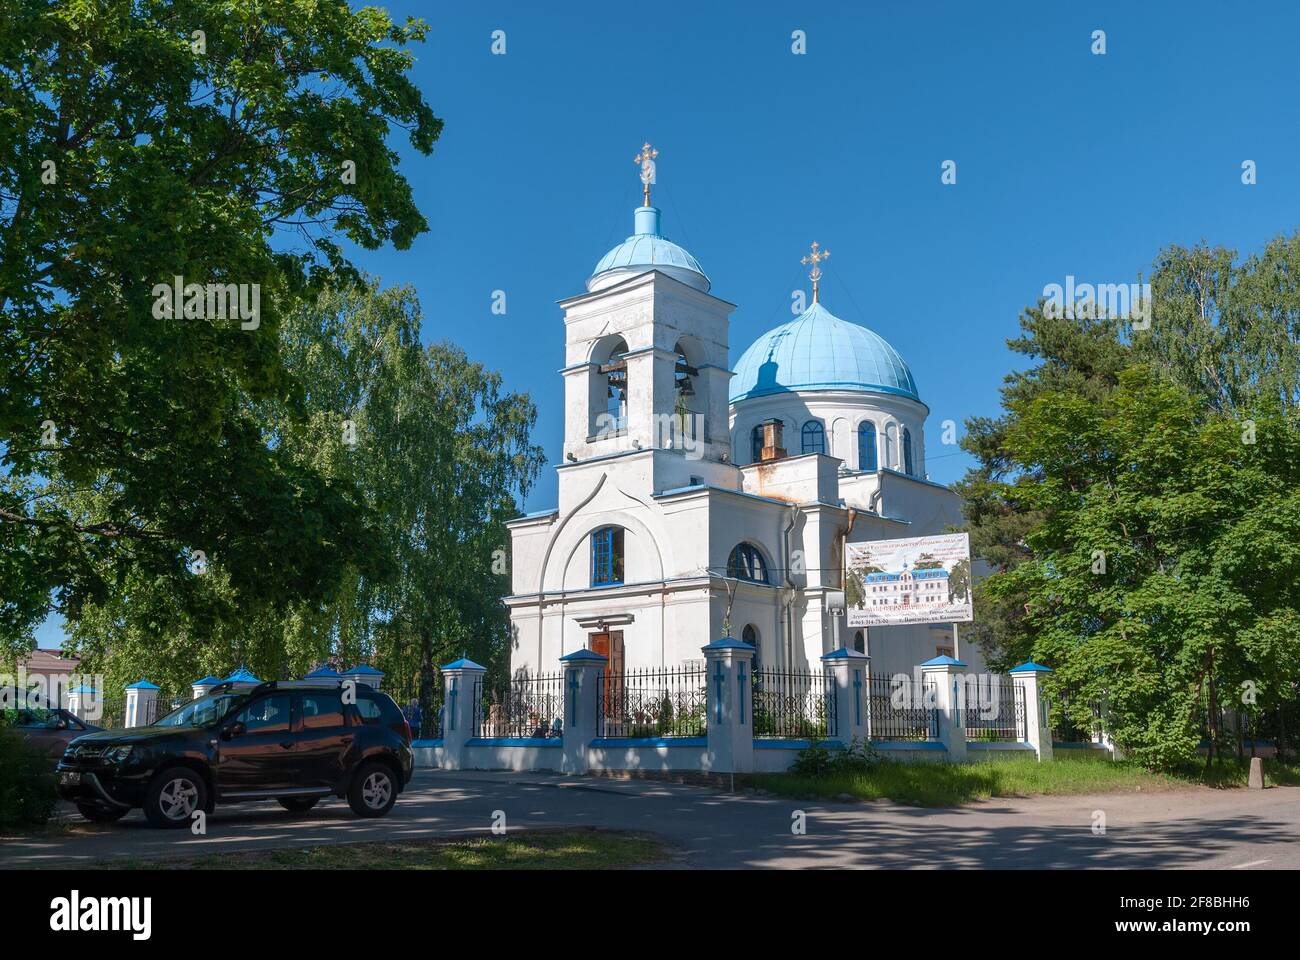 Priozersk, Leningrad Region, Russia - June 20, 2020: The Birth of the Mother of God Church and the church in town of Konevsky Monastery Stock Photo